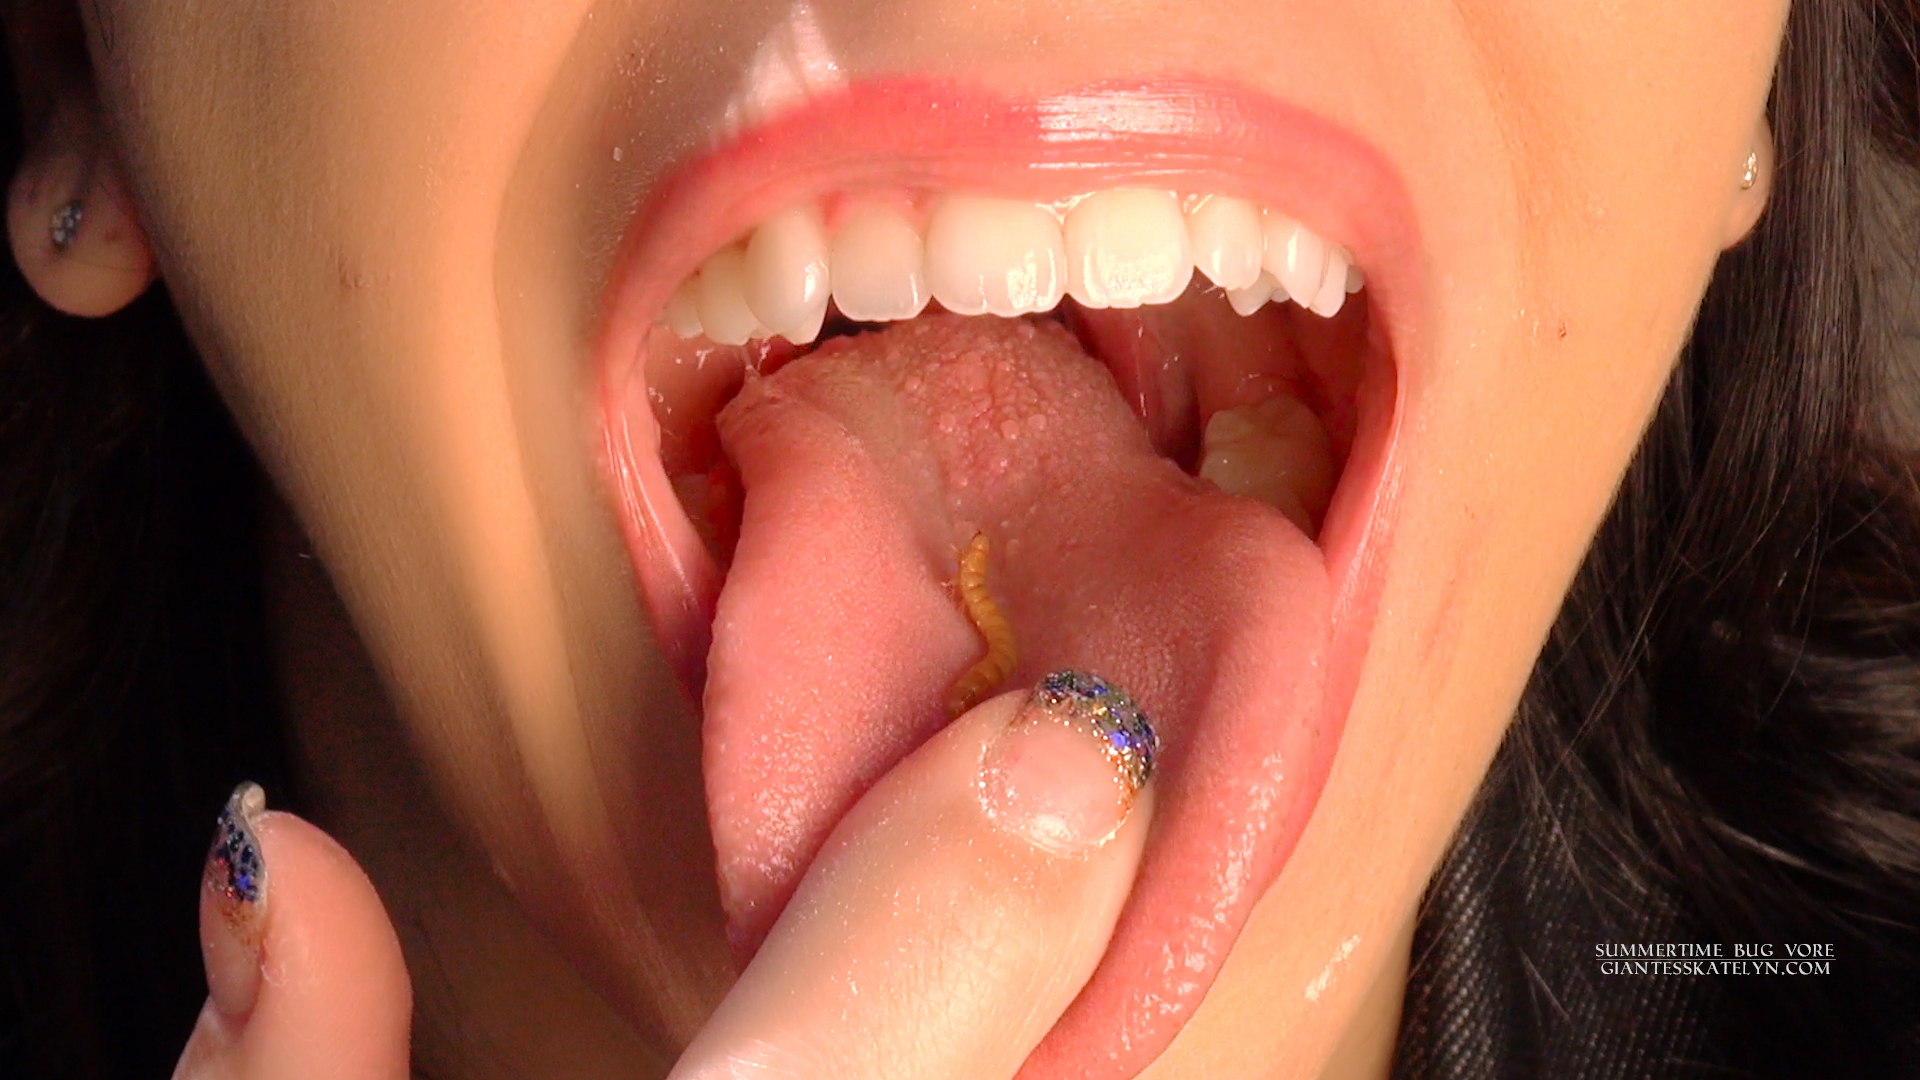 First D. reccomend uvula compilation mouth fetish